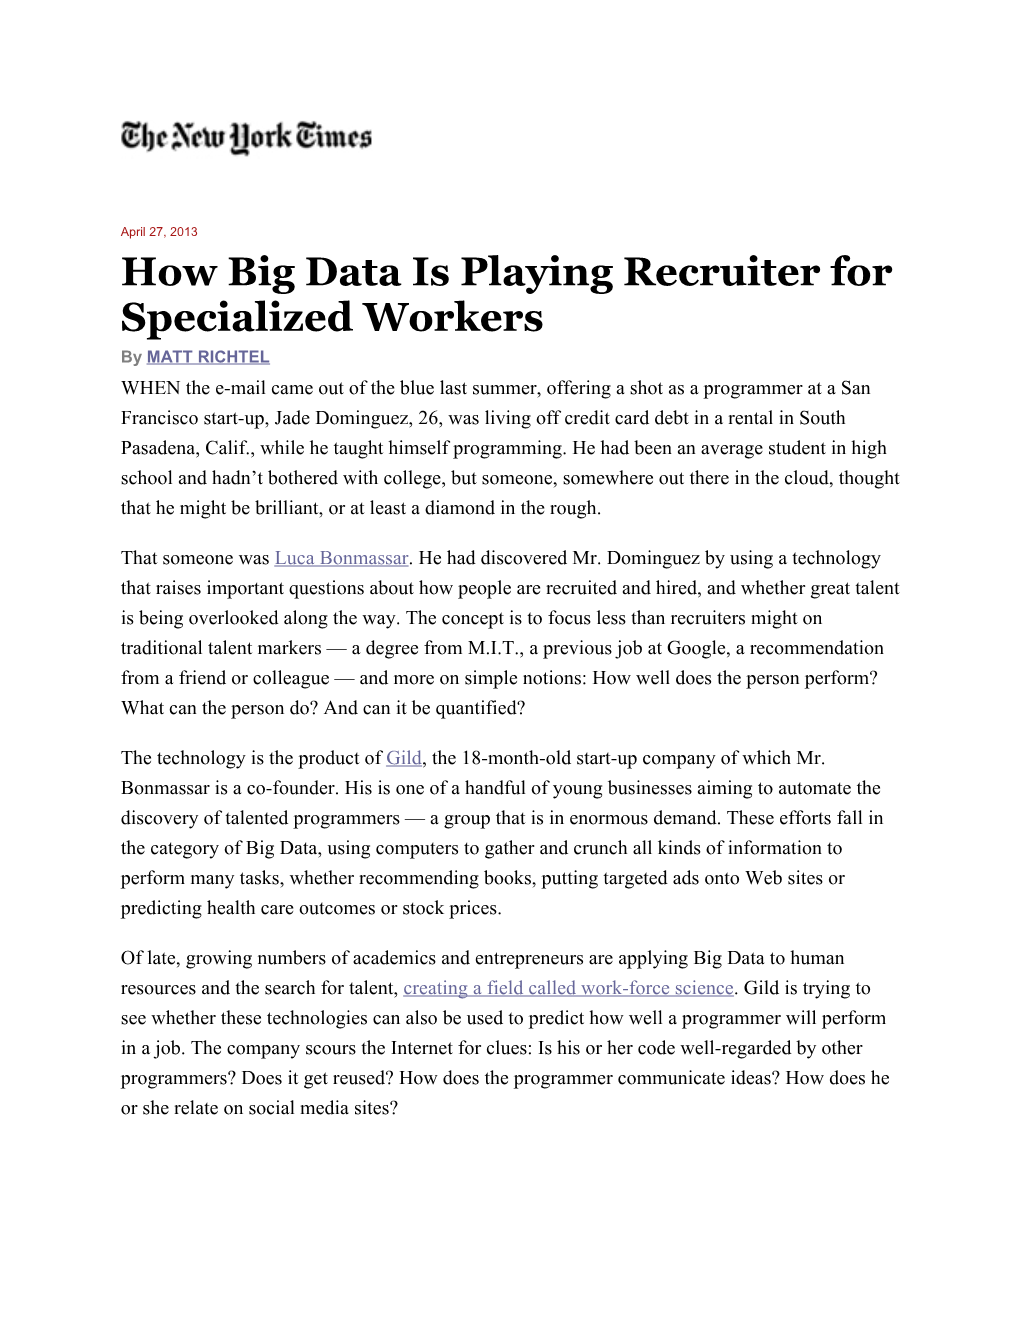 How Big Data Is Playing Recruiter for Specialized Workers